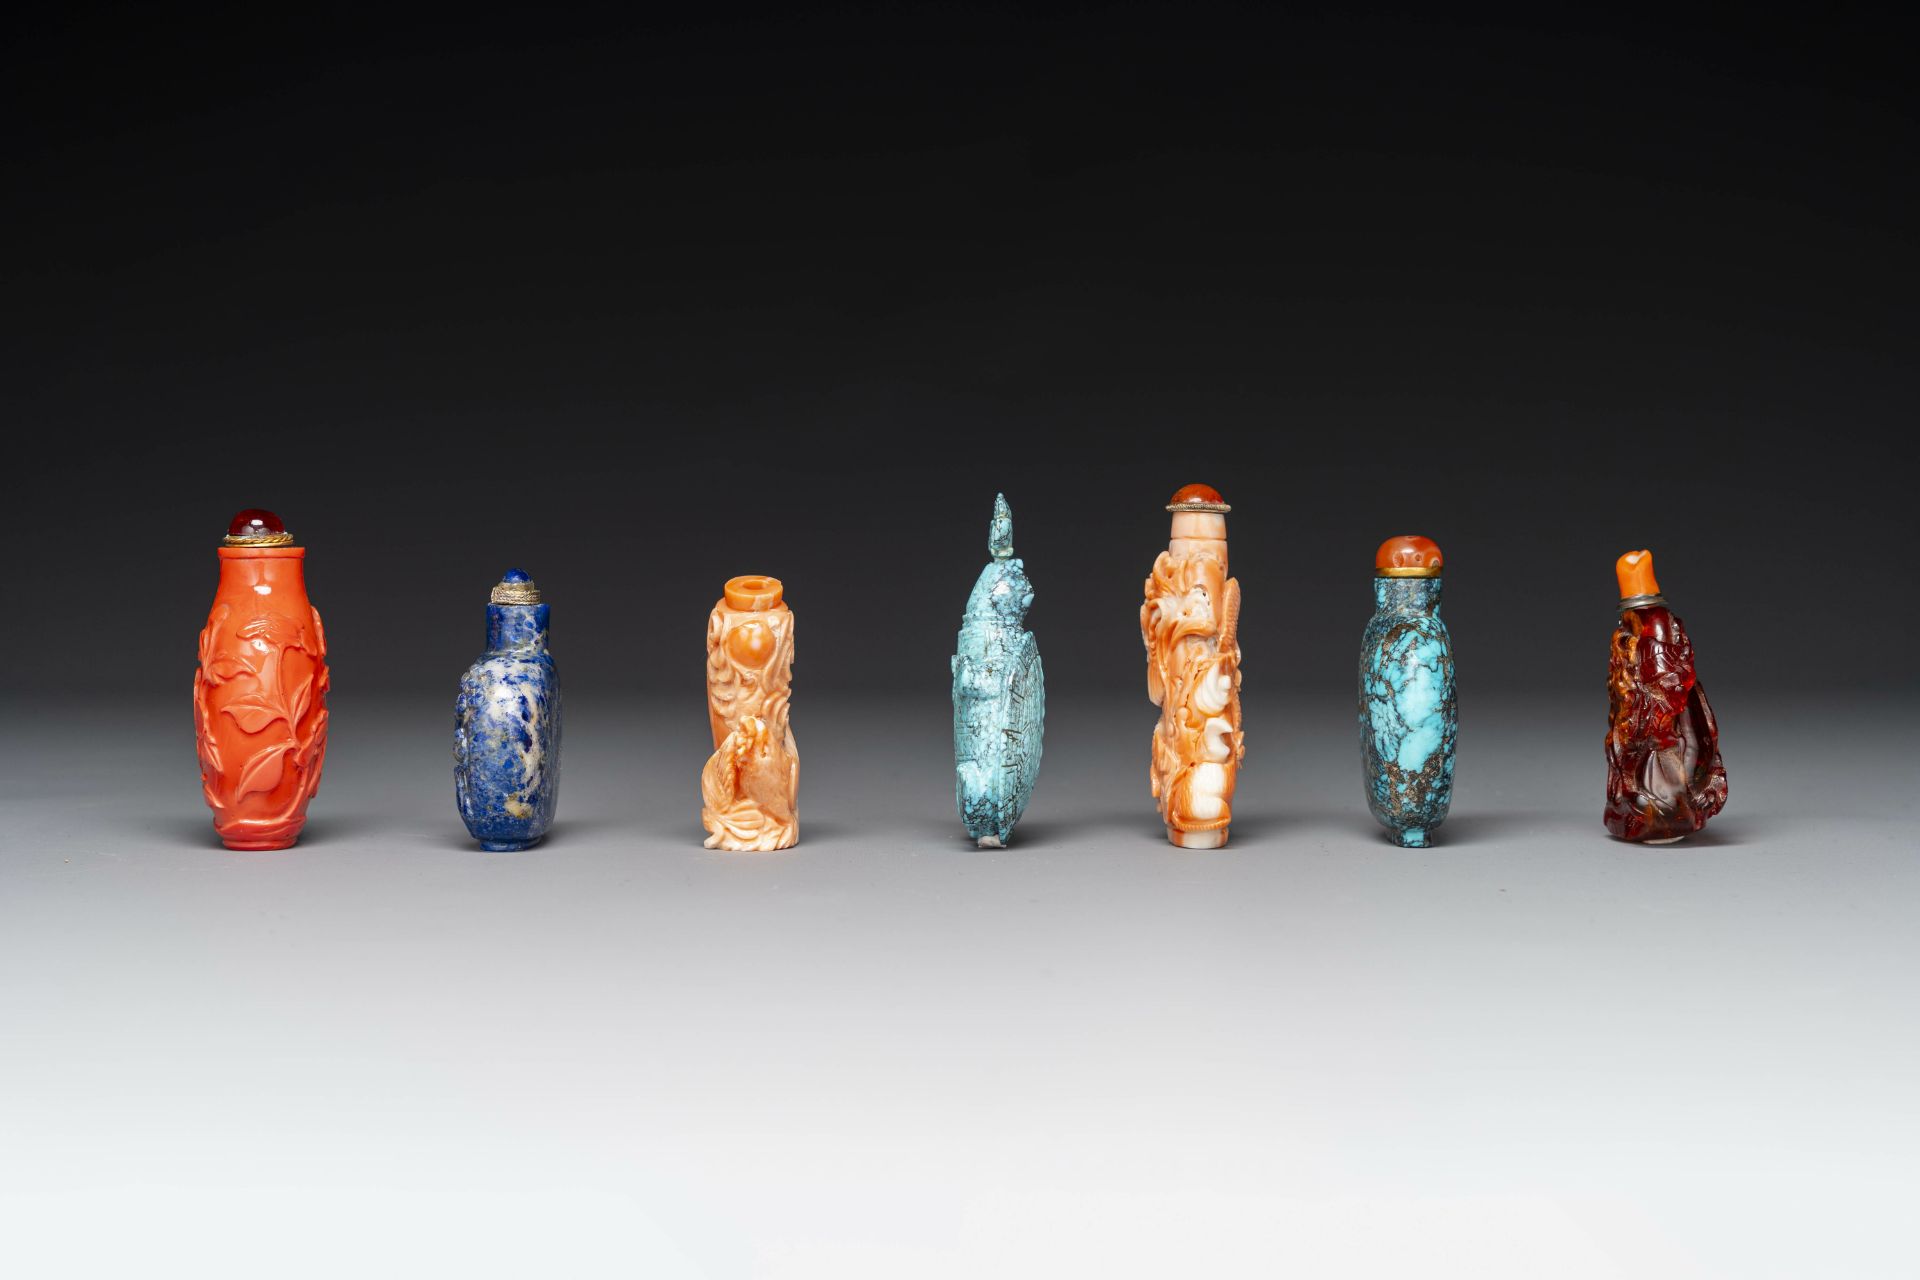 Seven varied Chinese snuff bottles of precious stone, red coral, glass and amber, 19th C. - Image 4 of 7